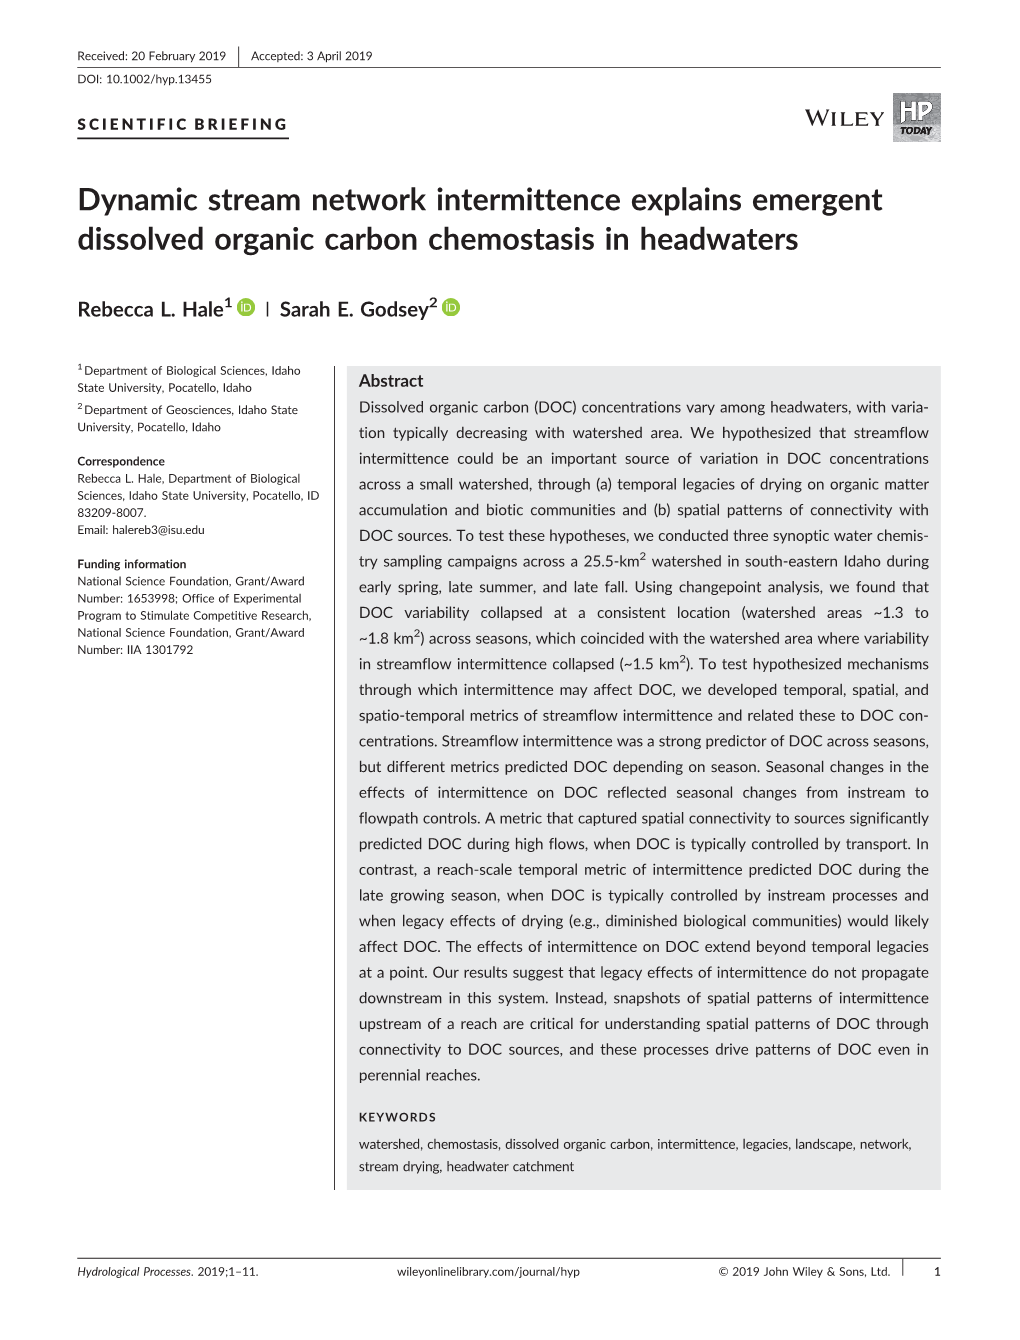 Dynamic Stream Network Intermittence Explains Emergent Dissolved Organic Carbon Chemostasis in Headwaters